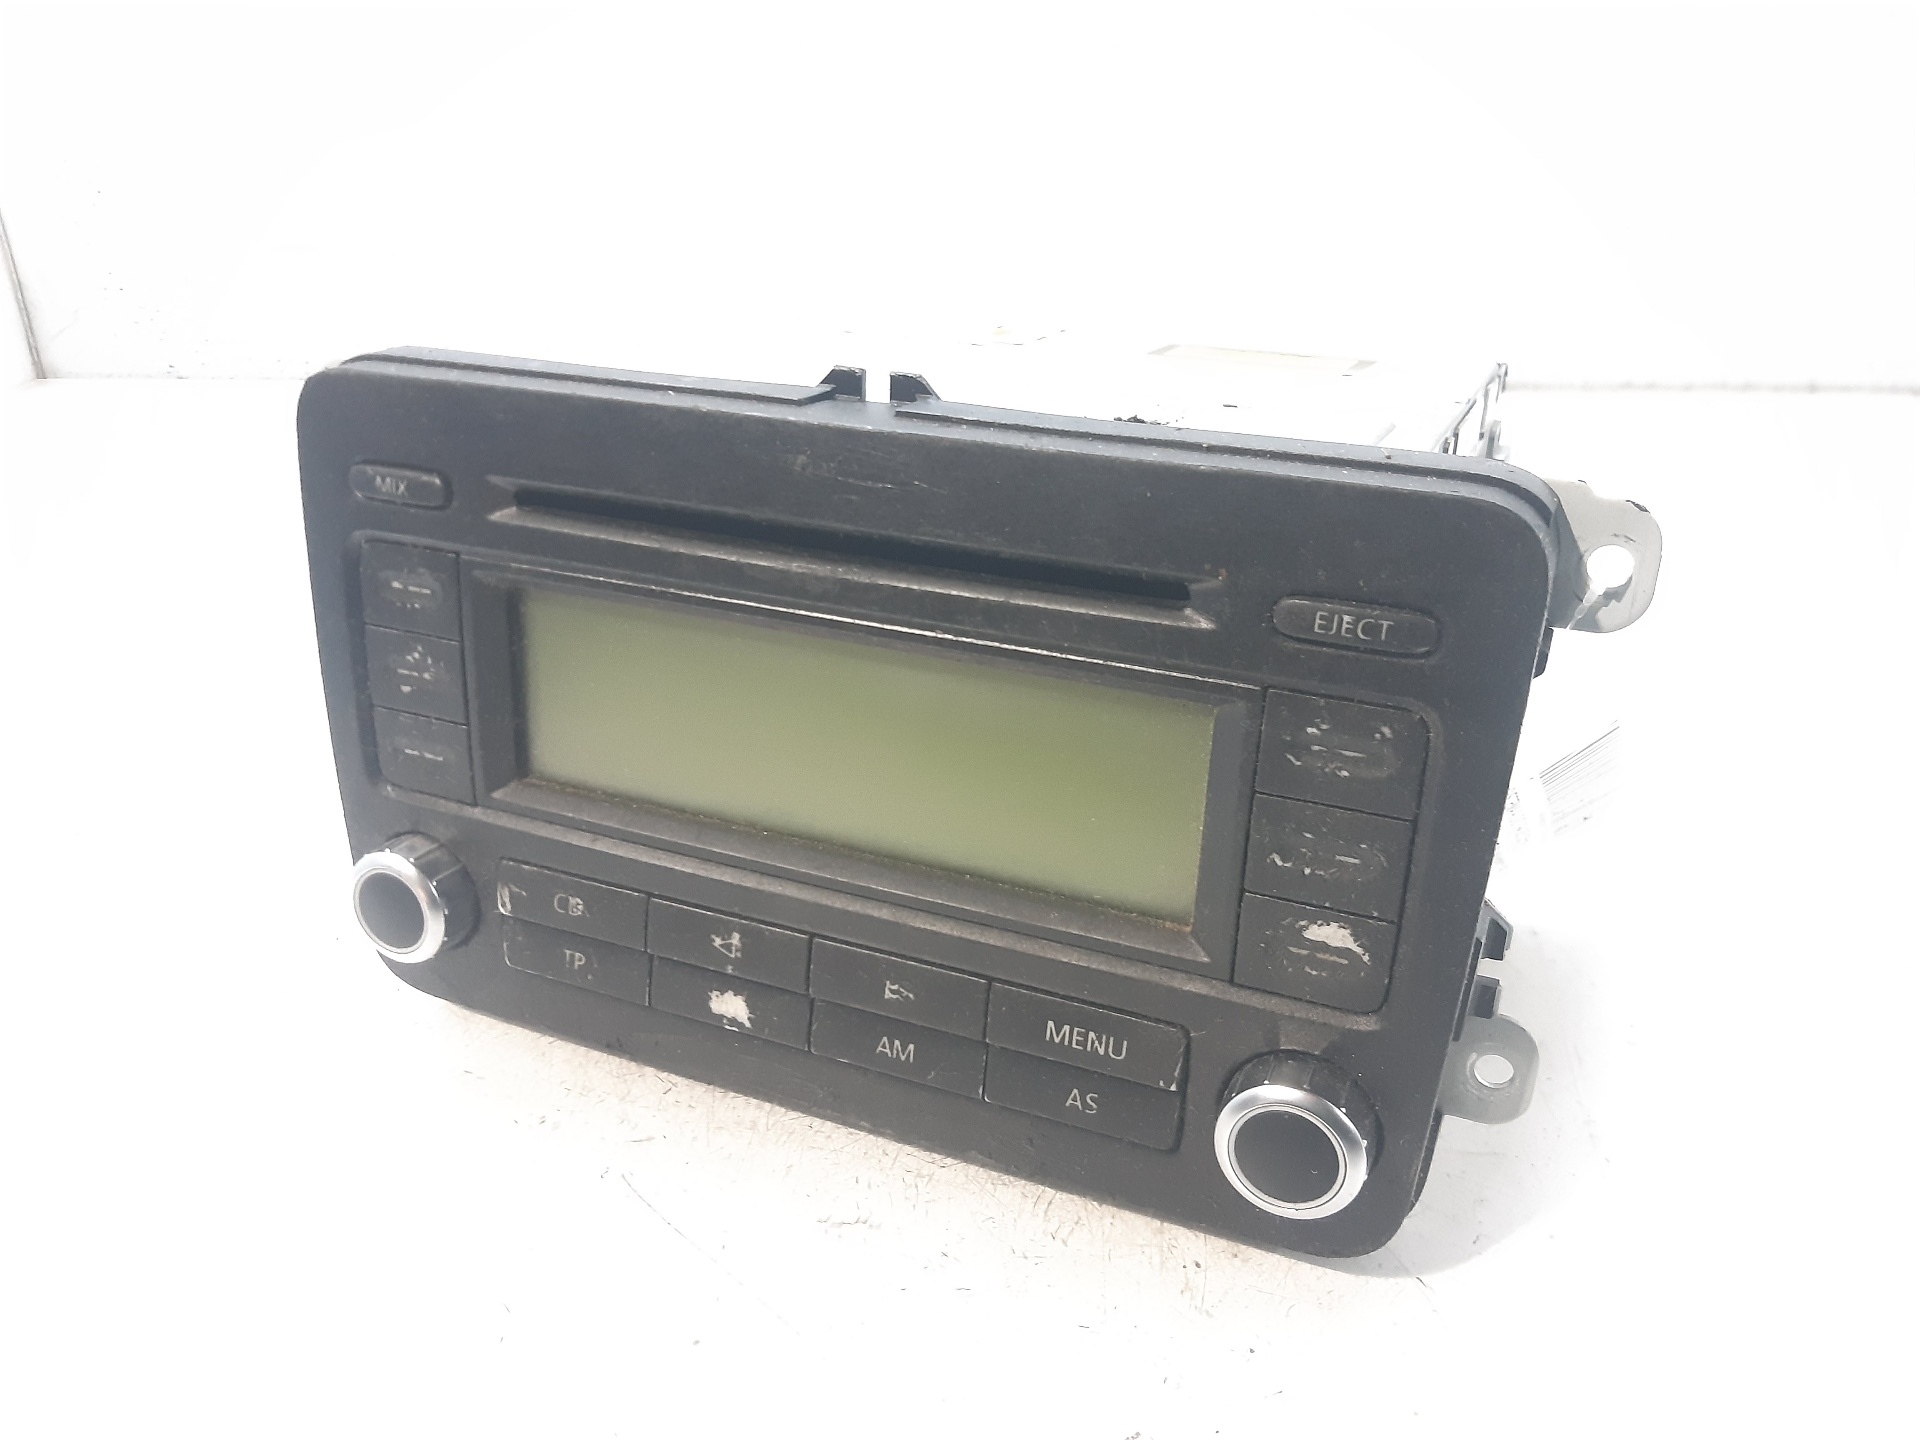 VOLKSWAGEN Golf 5 generation (2003-2009) Music Player Without GPS 1K0035186P 25065756